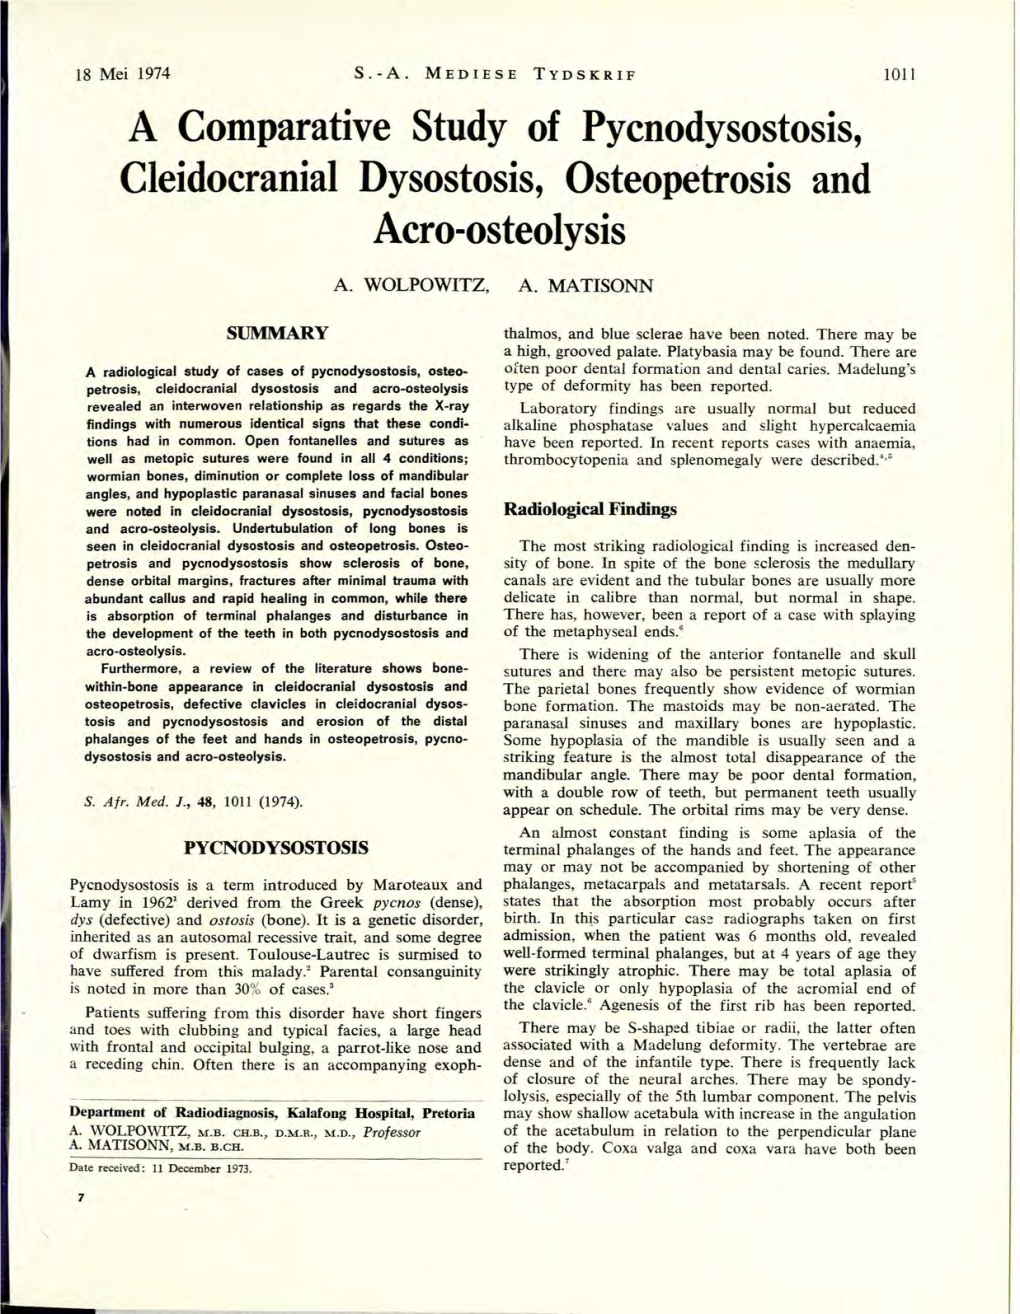 A Comparative Study of Pycnodysostosis, Cleidocranial Dysostosis, Osteopetrosis and Acro-Osteolysis